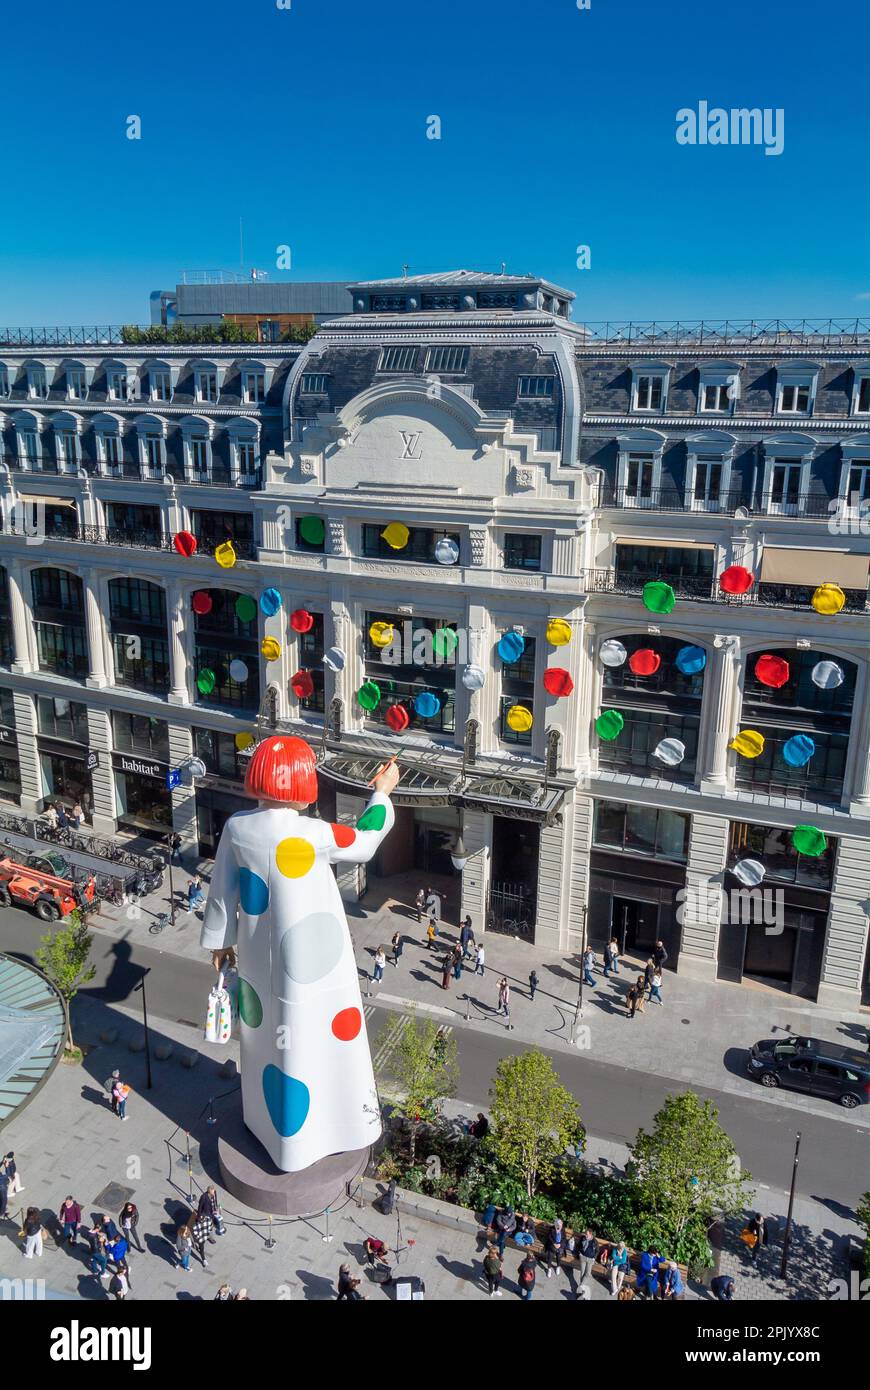 A giant Yayoi Kusama sculpture has popped up on the façade of the Louis Vuitton  store in Champs Èlysèes, Paris - Global Design News